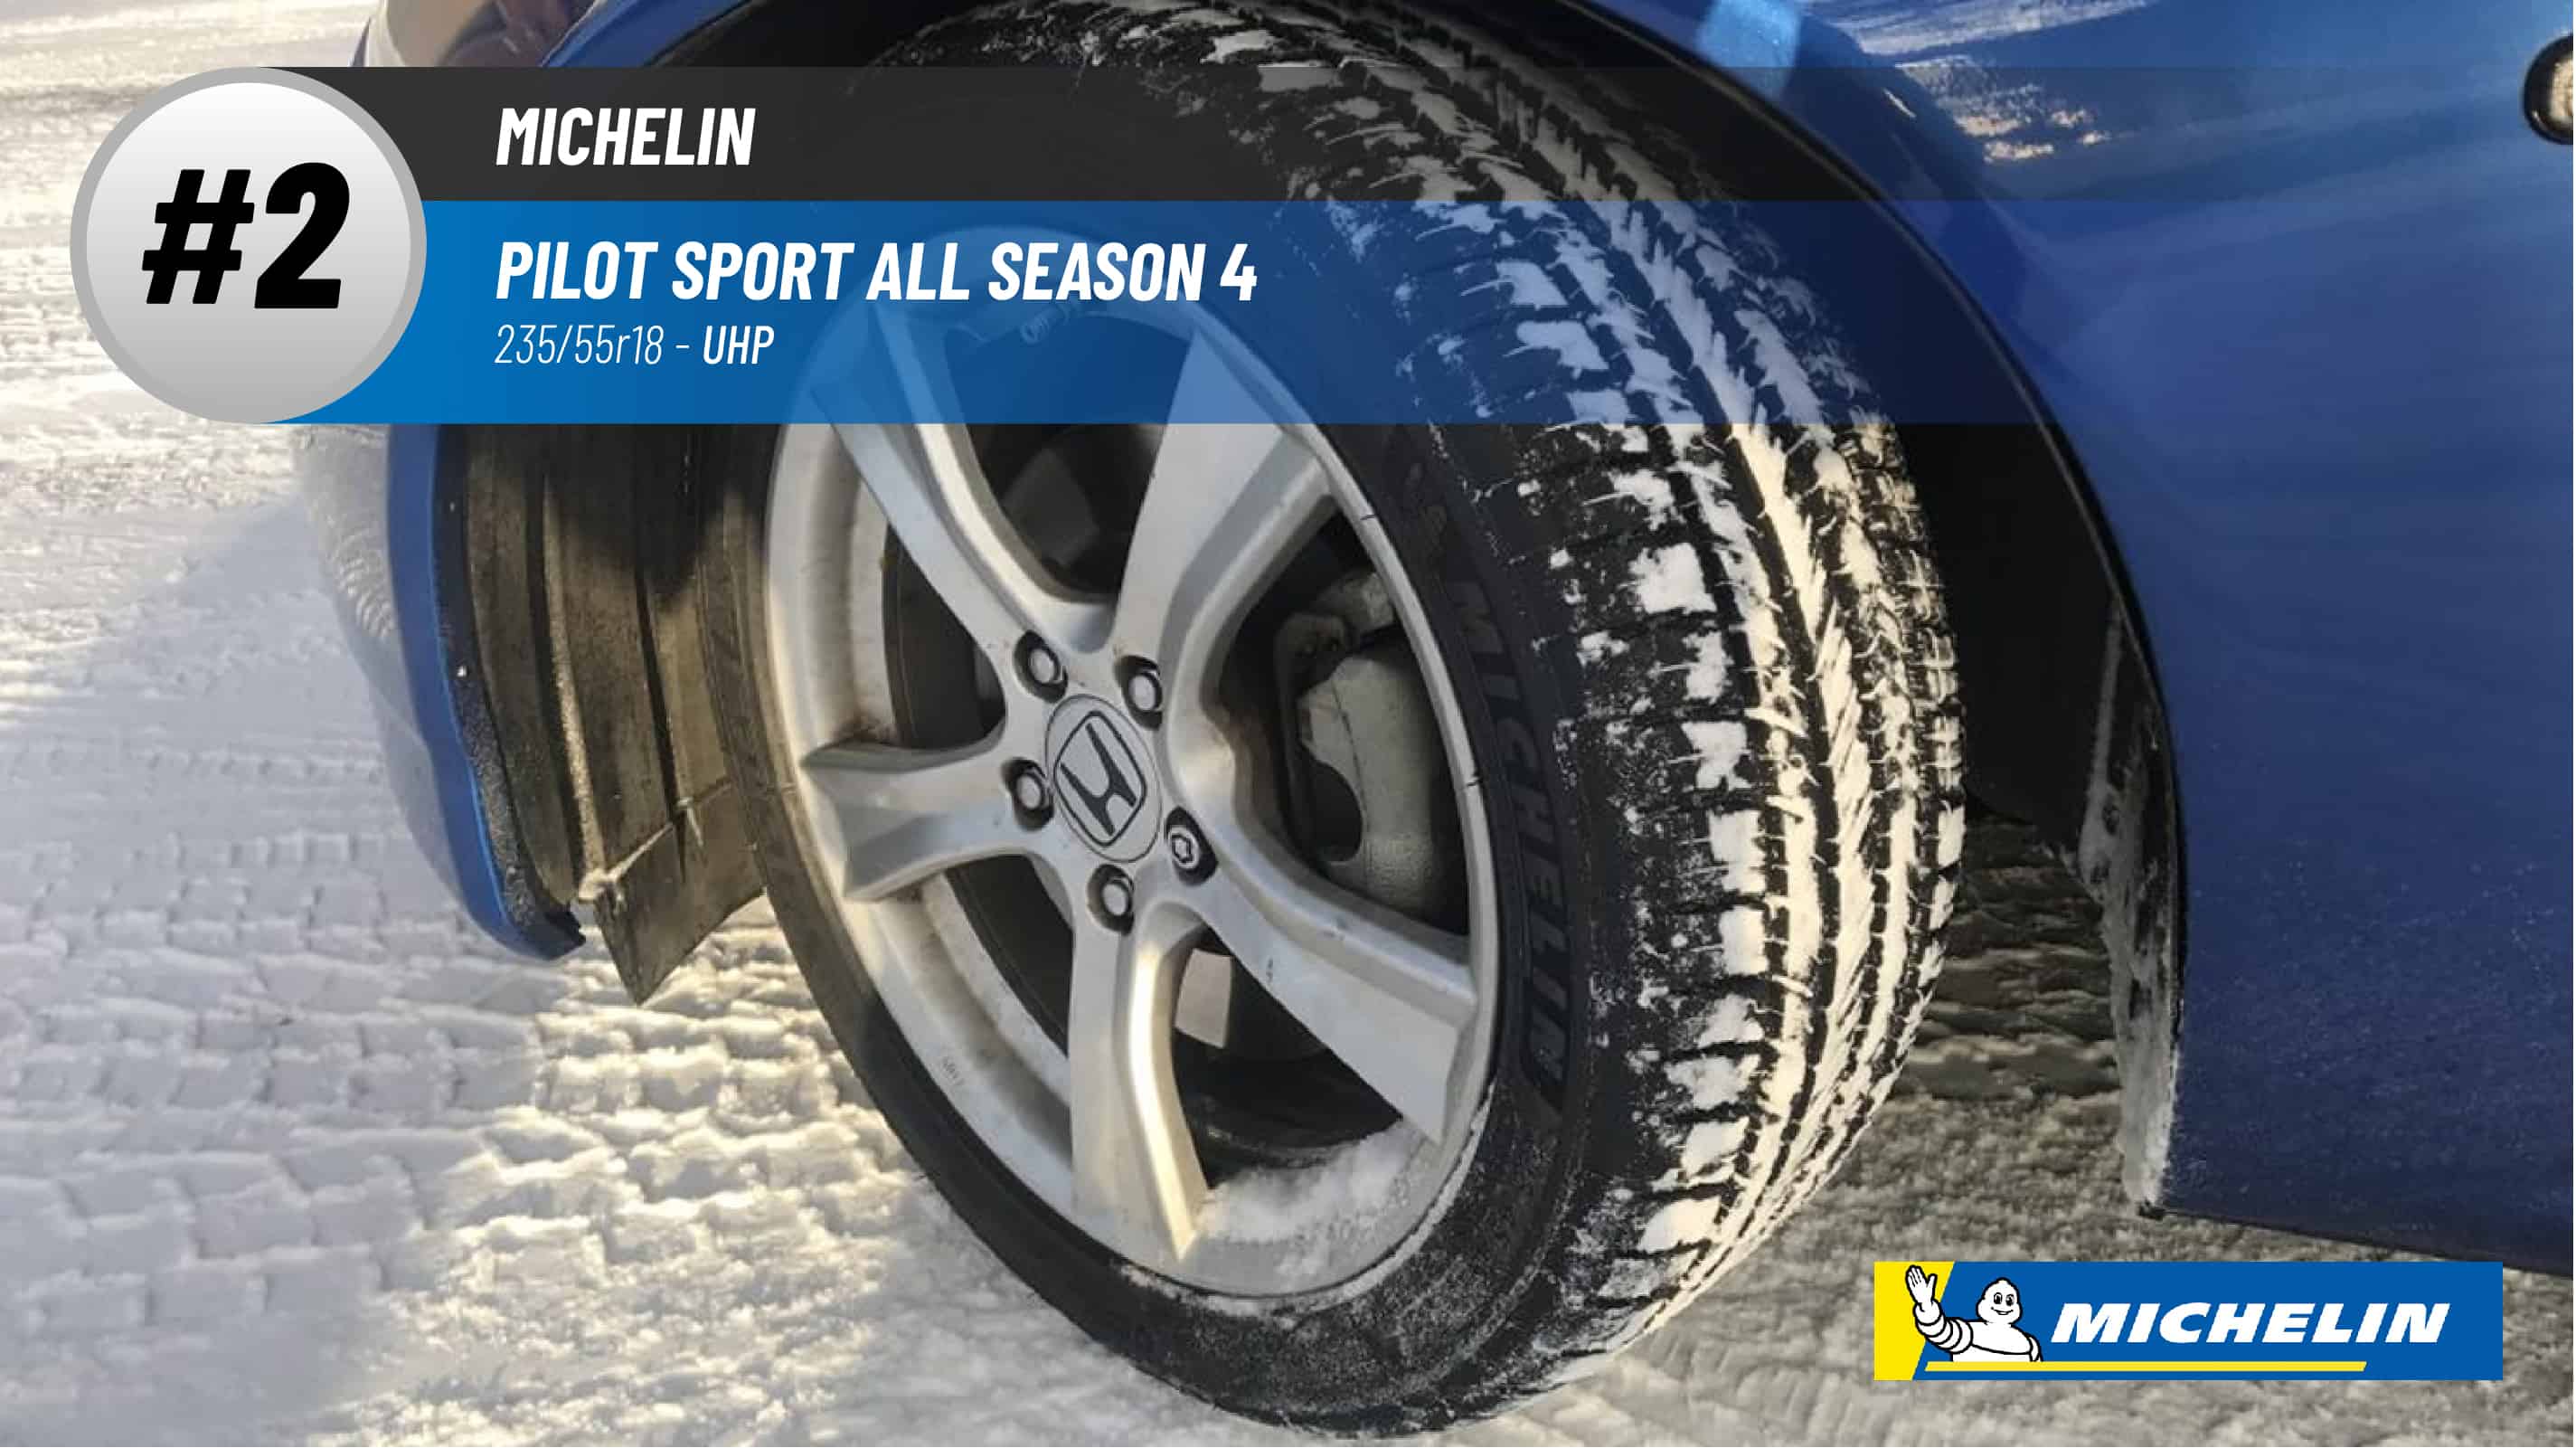 Top #2 UHP Tires: Michelin Pilot Sport All Season 4 – best 235/55r18